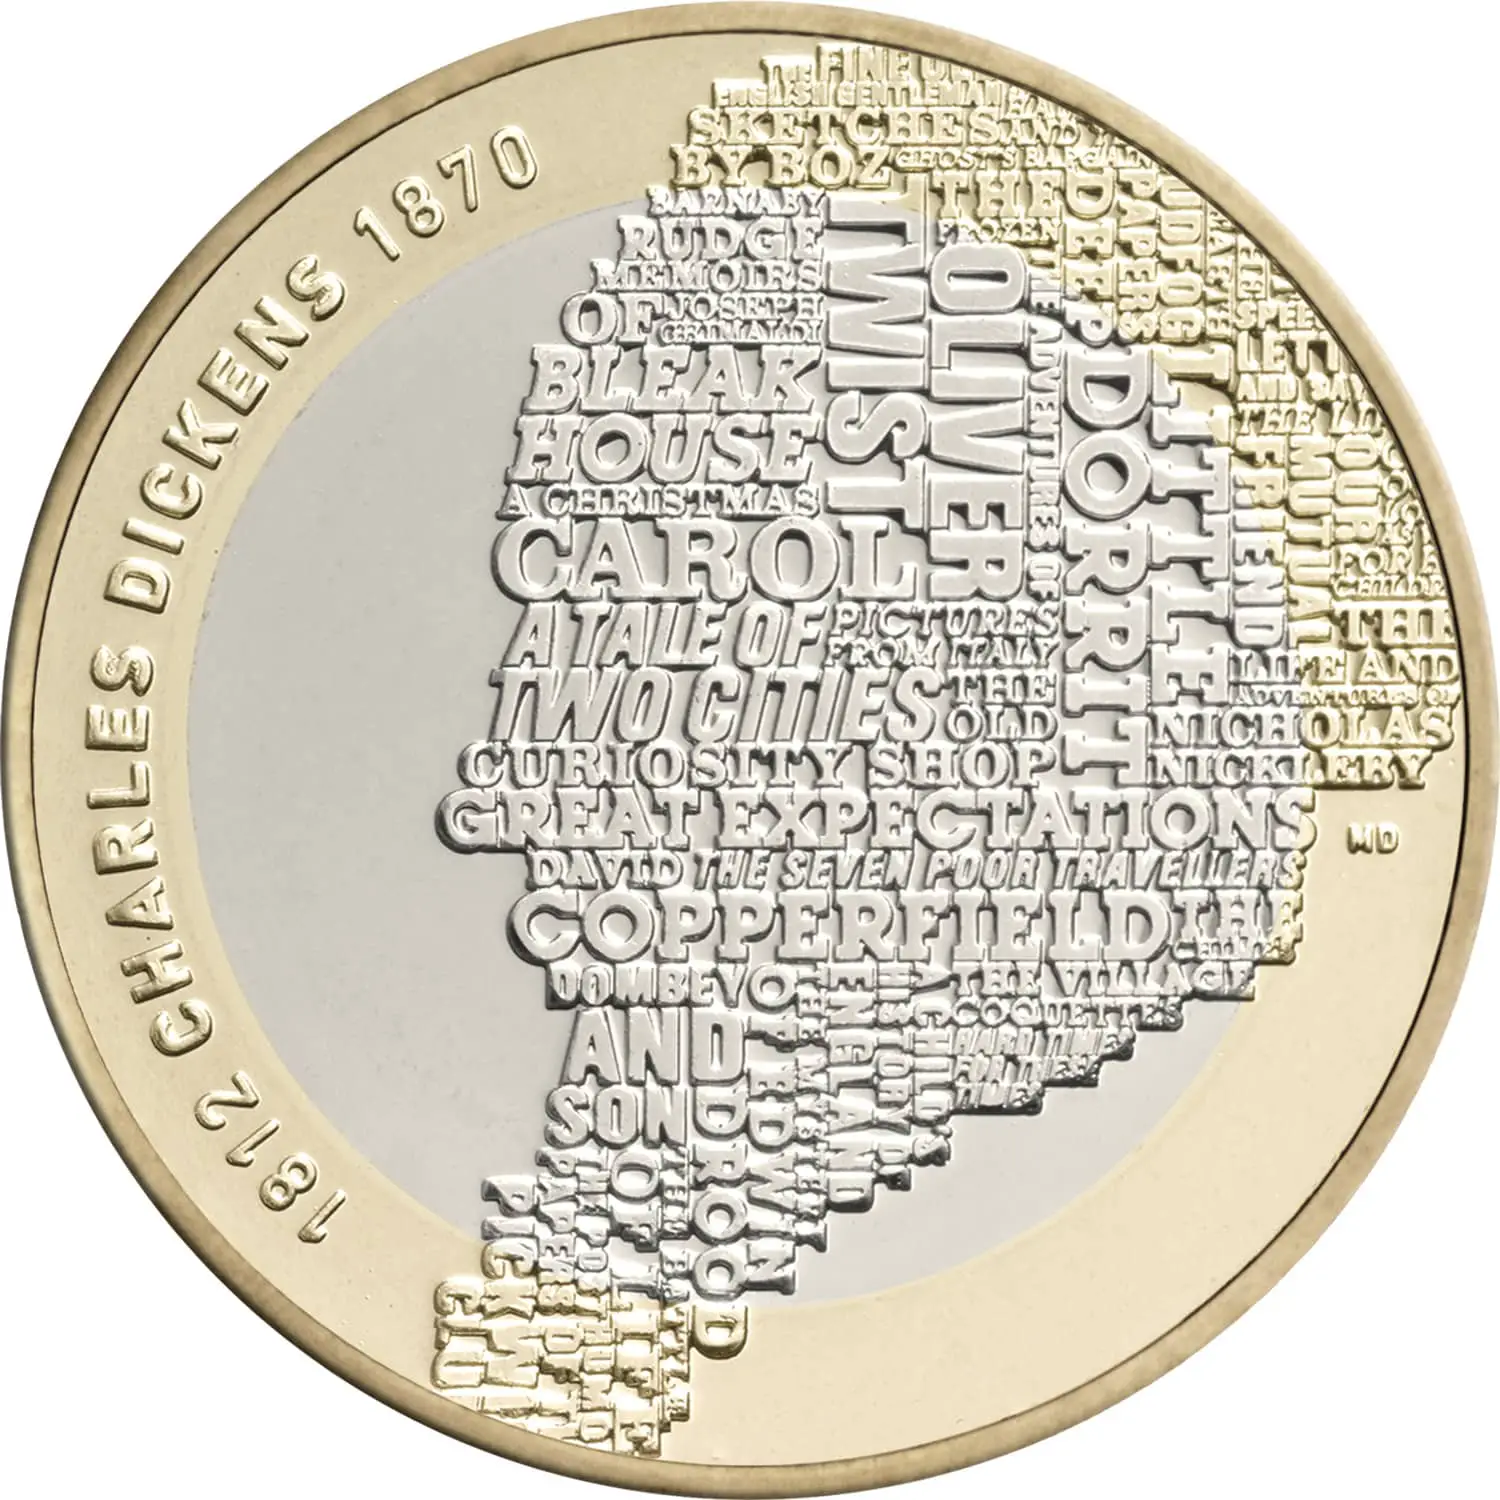 Design of the Charles Dickens £2 coin